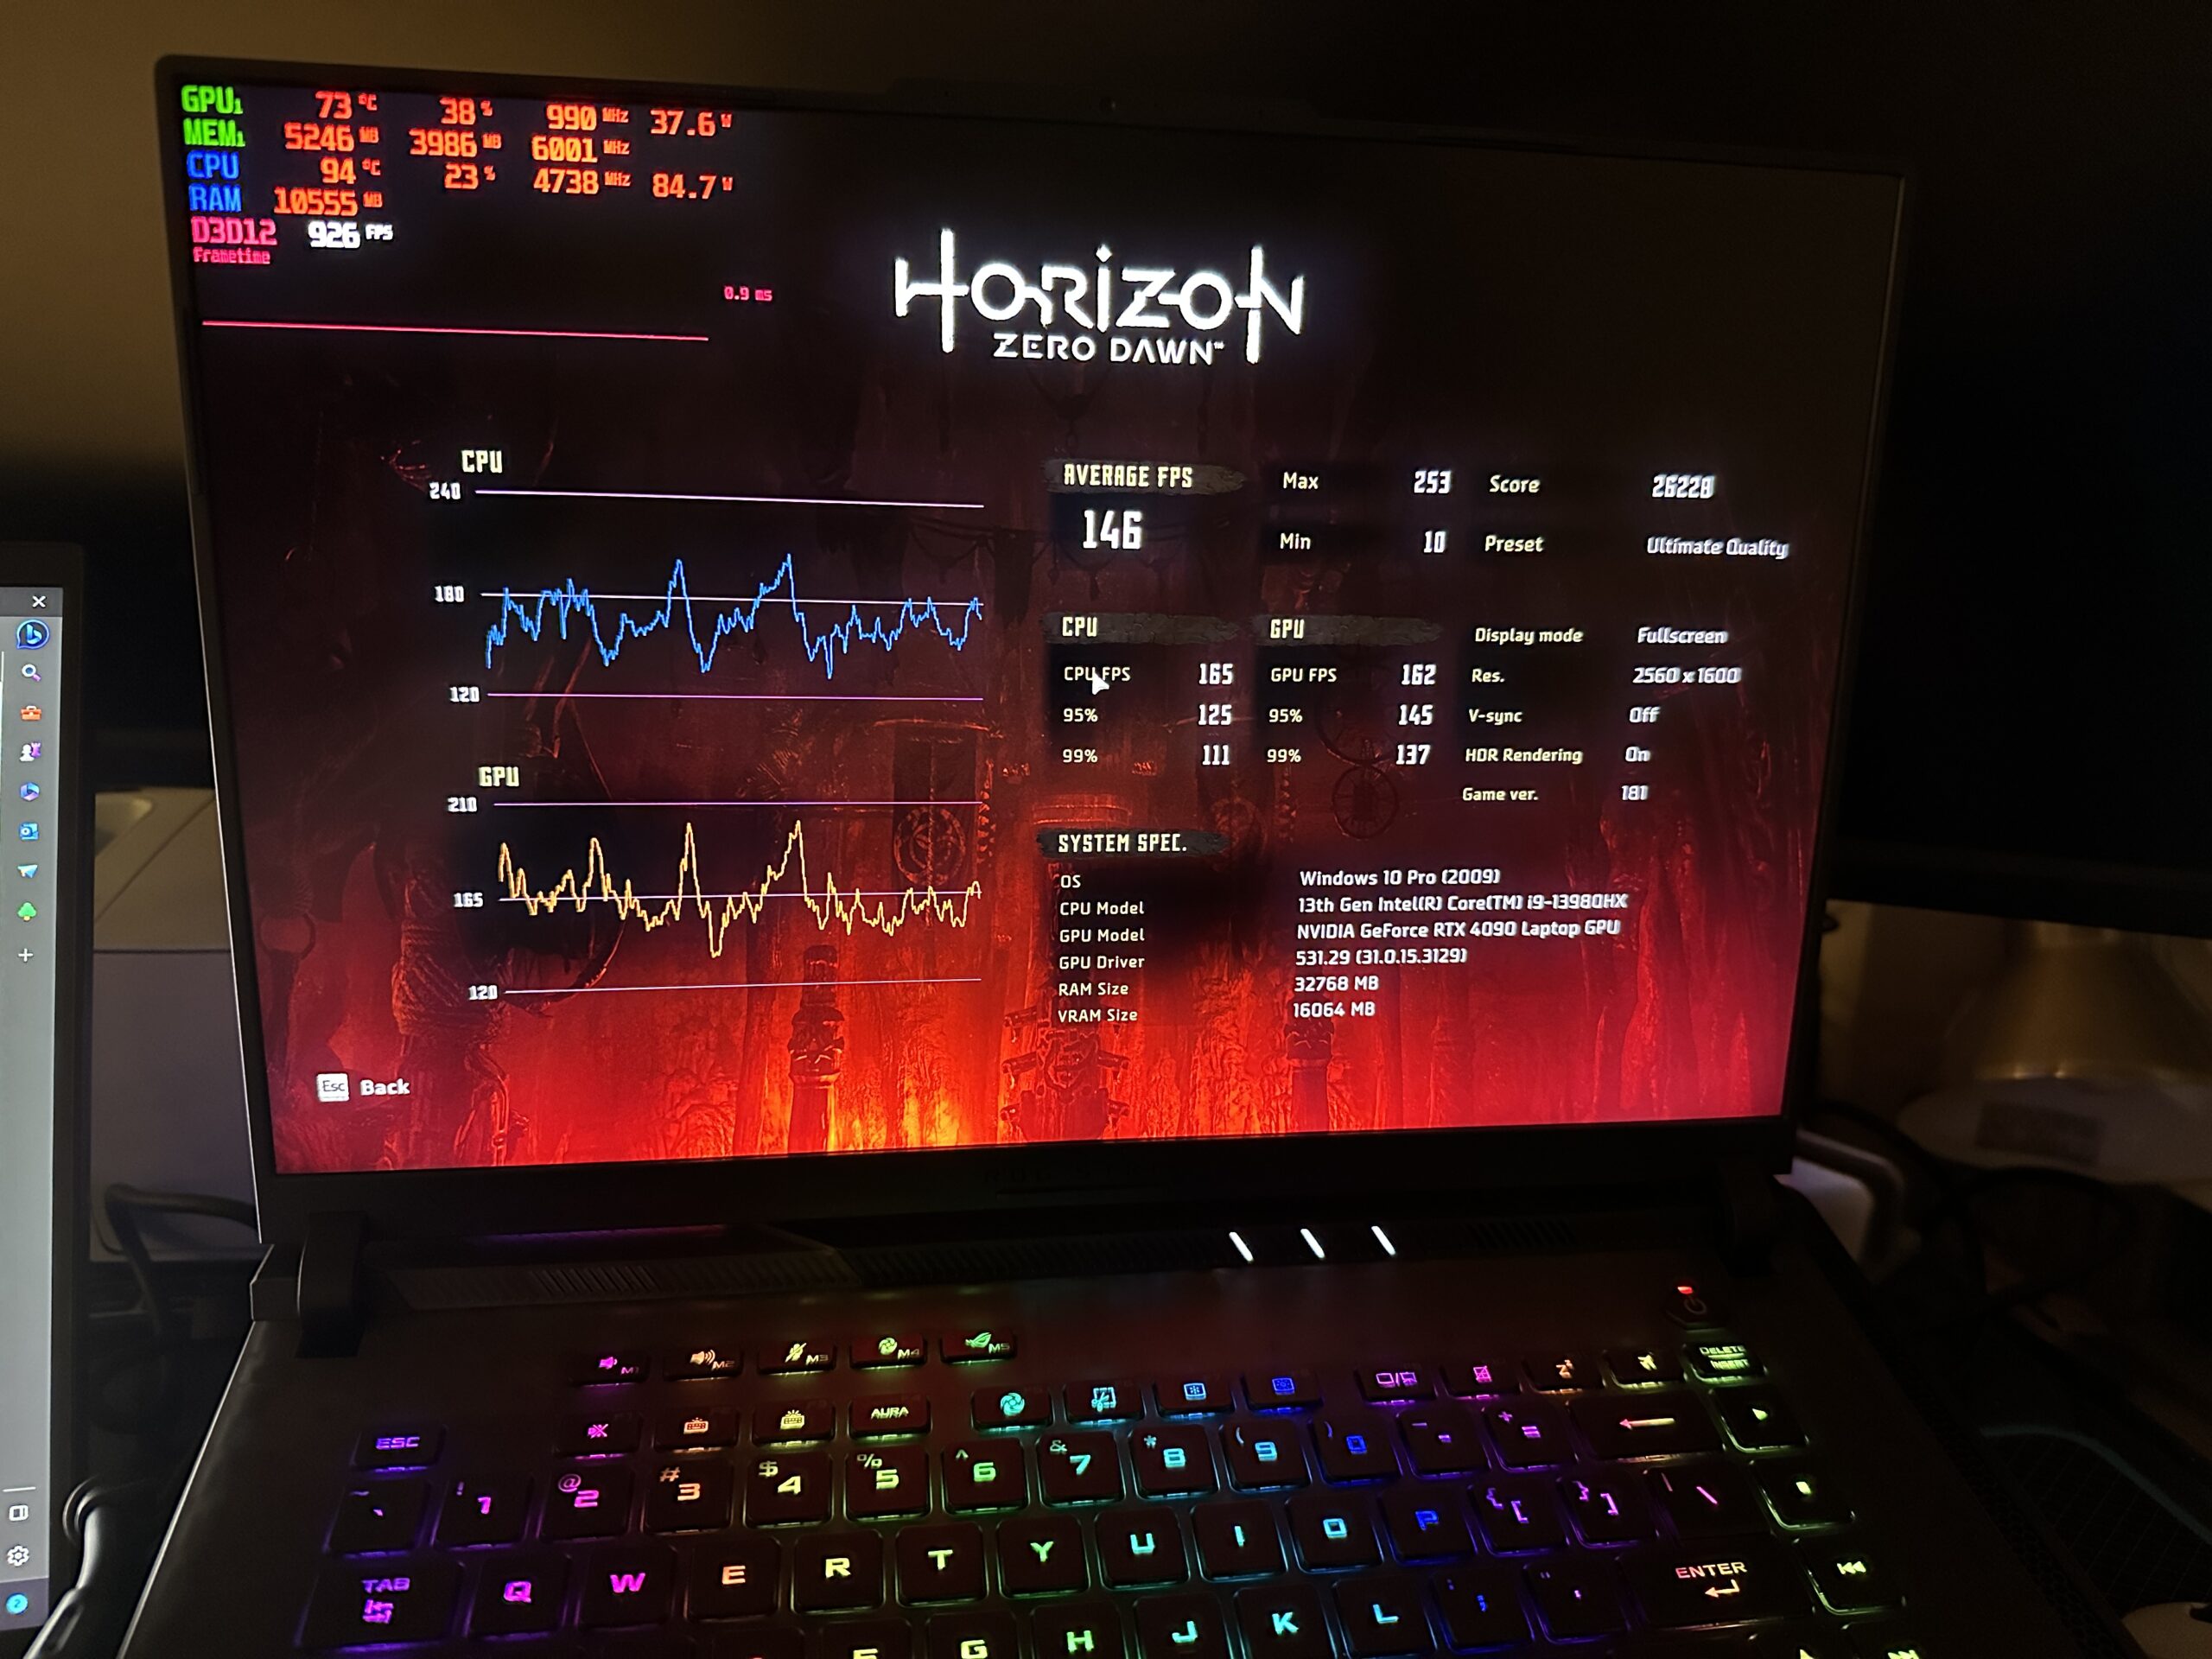 Must-have programs to get the most out of your gaming laptop